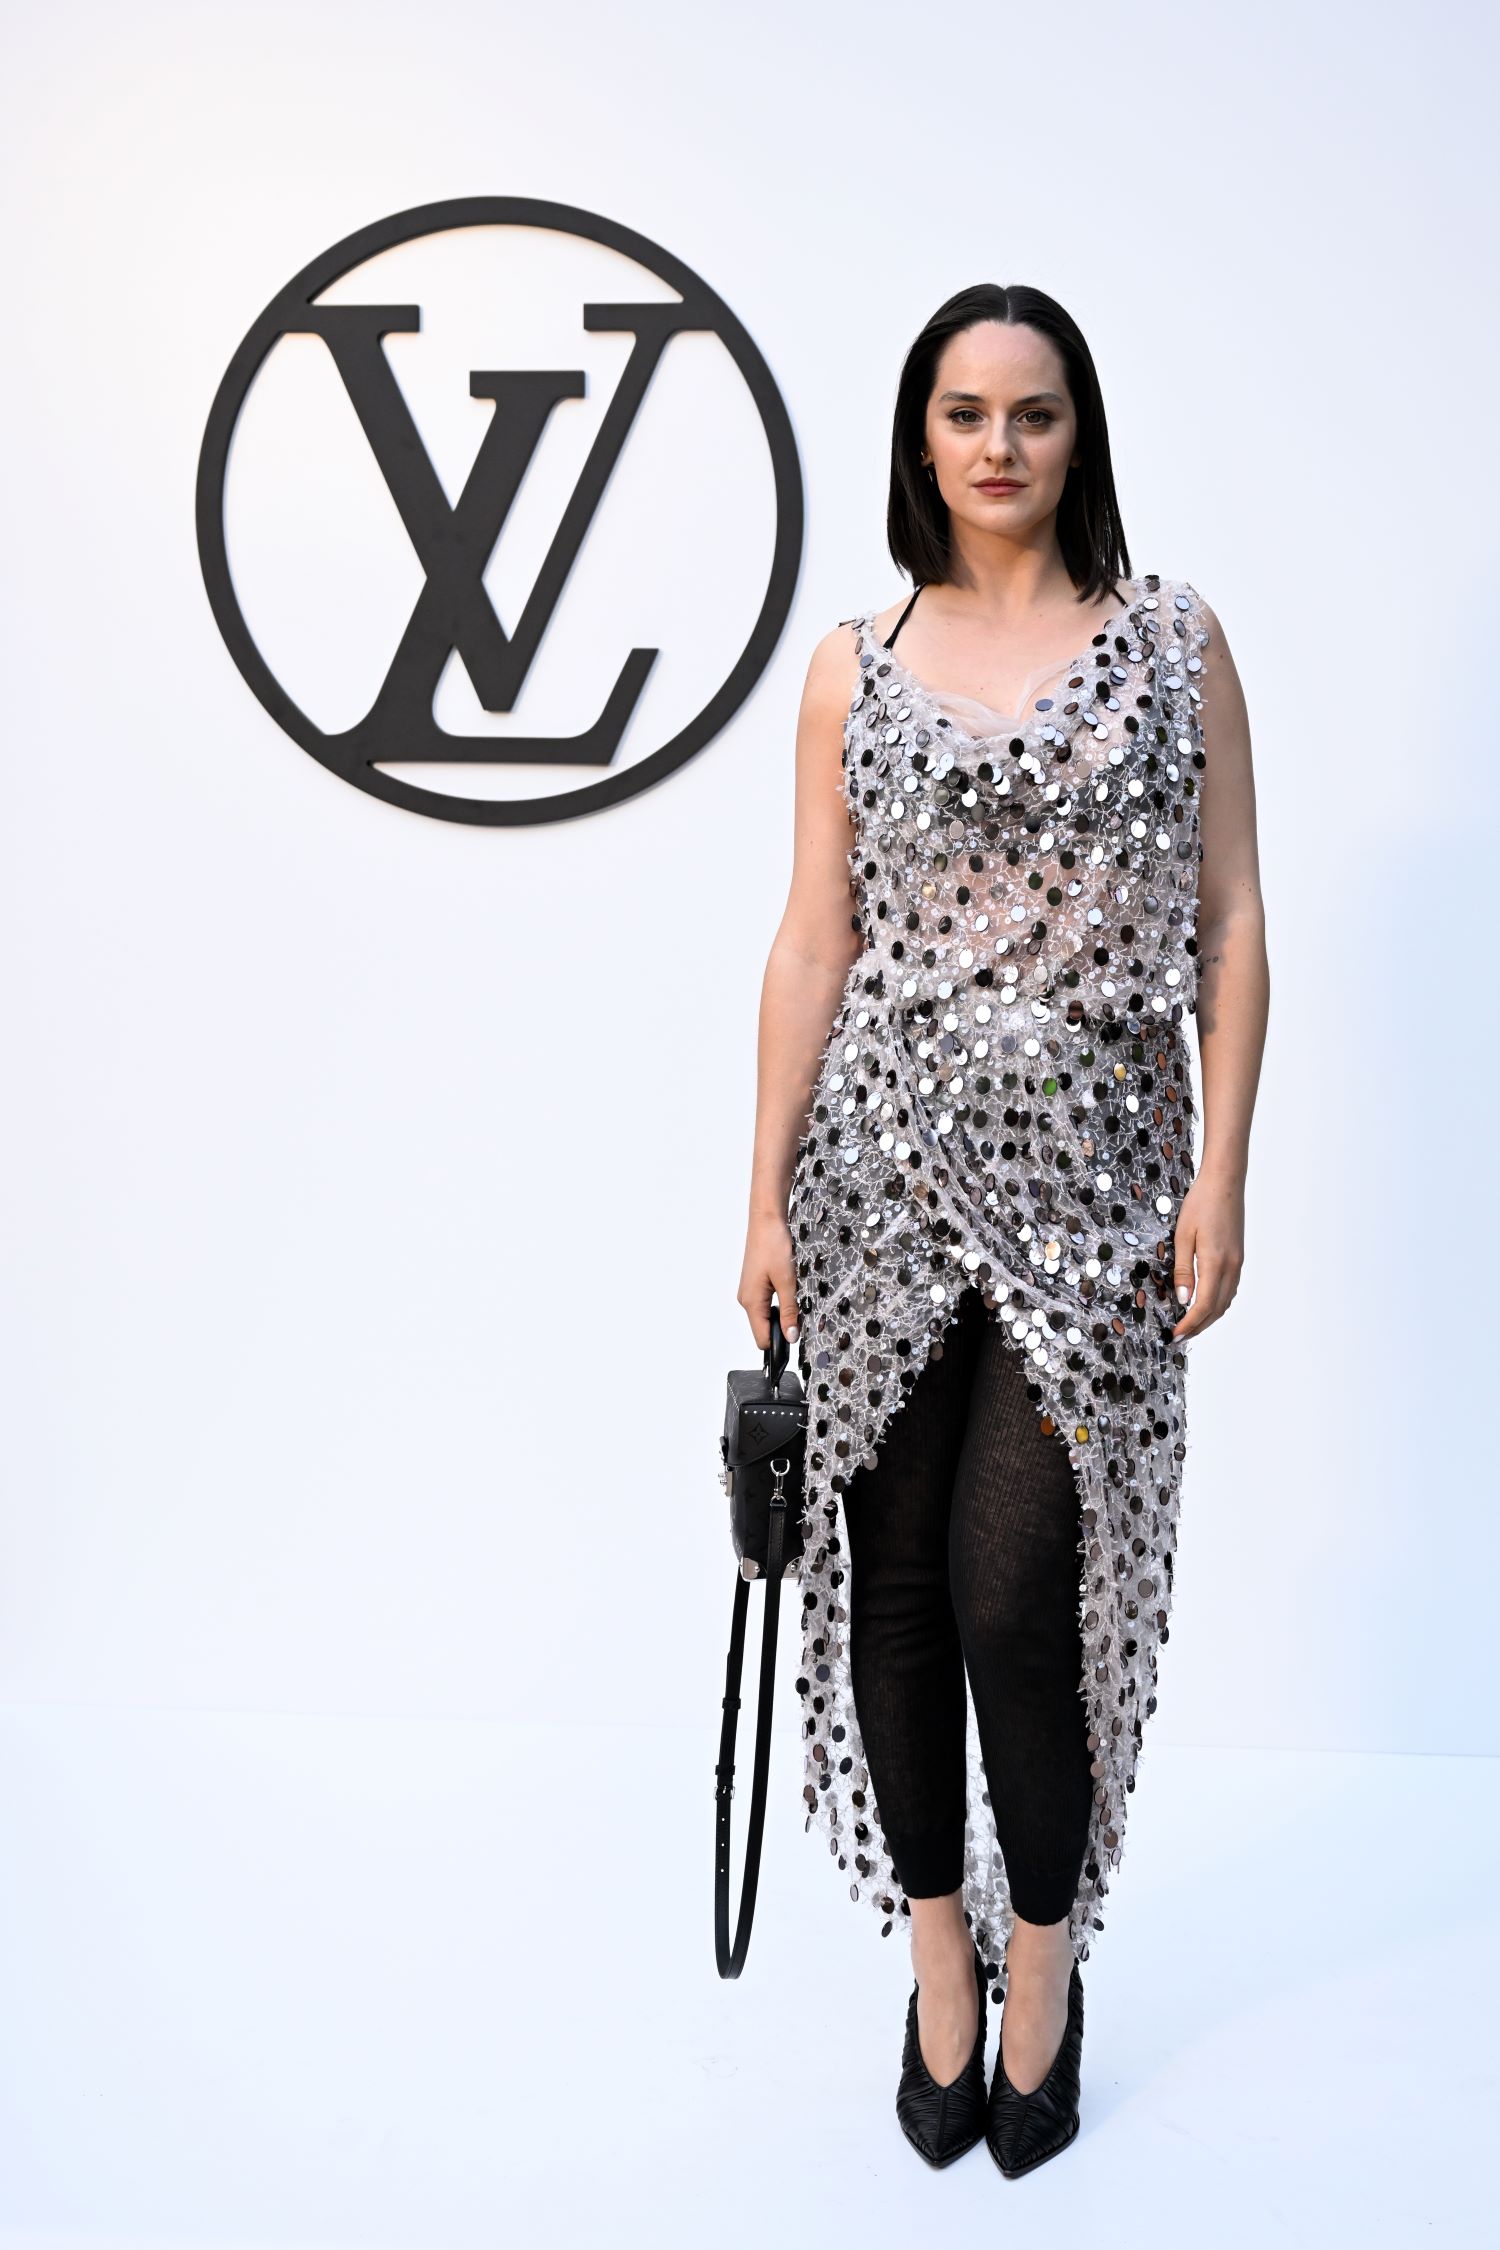 NOÉMIE MERLANT attending the Cruise 2025 Fashion Show by Louis Vuitton in Barcelona | CRUISE 2025 FASHION SHOW COLLECTION © Louis Vuitton – All rights reserved | Courtesy of Gnazzo Group.